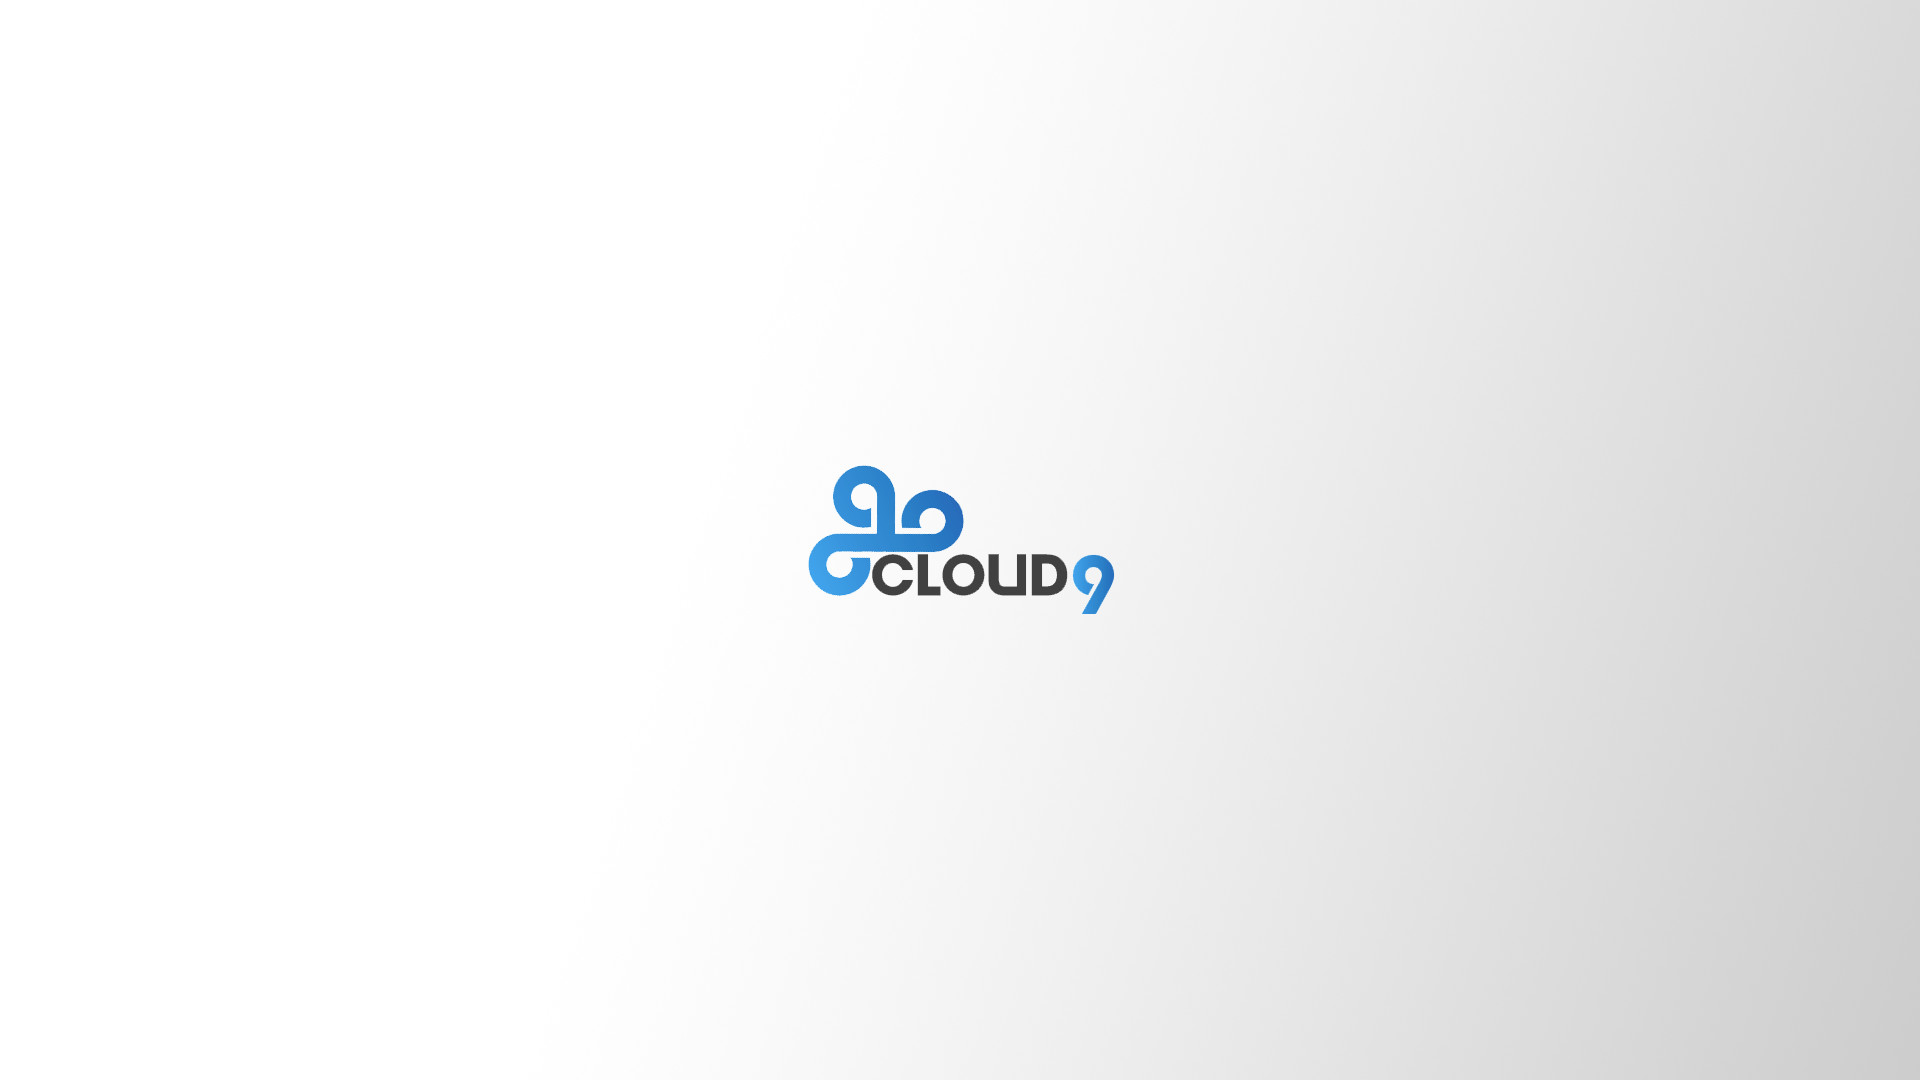 1920x1080 Cloud 9 | Cloud 9 Images, Pictures, Wallpapers on NMgnCP